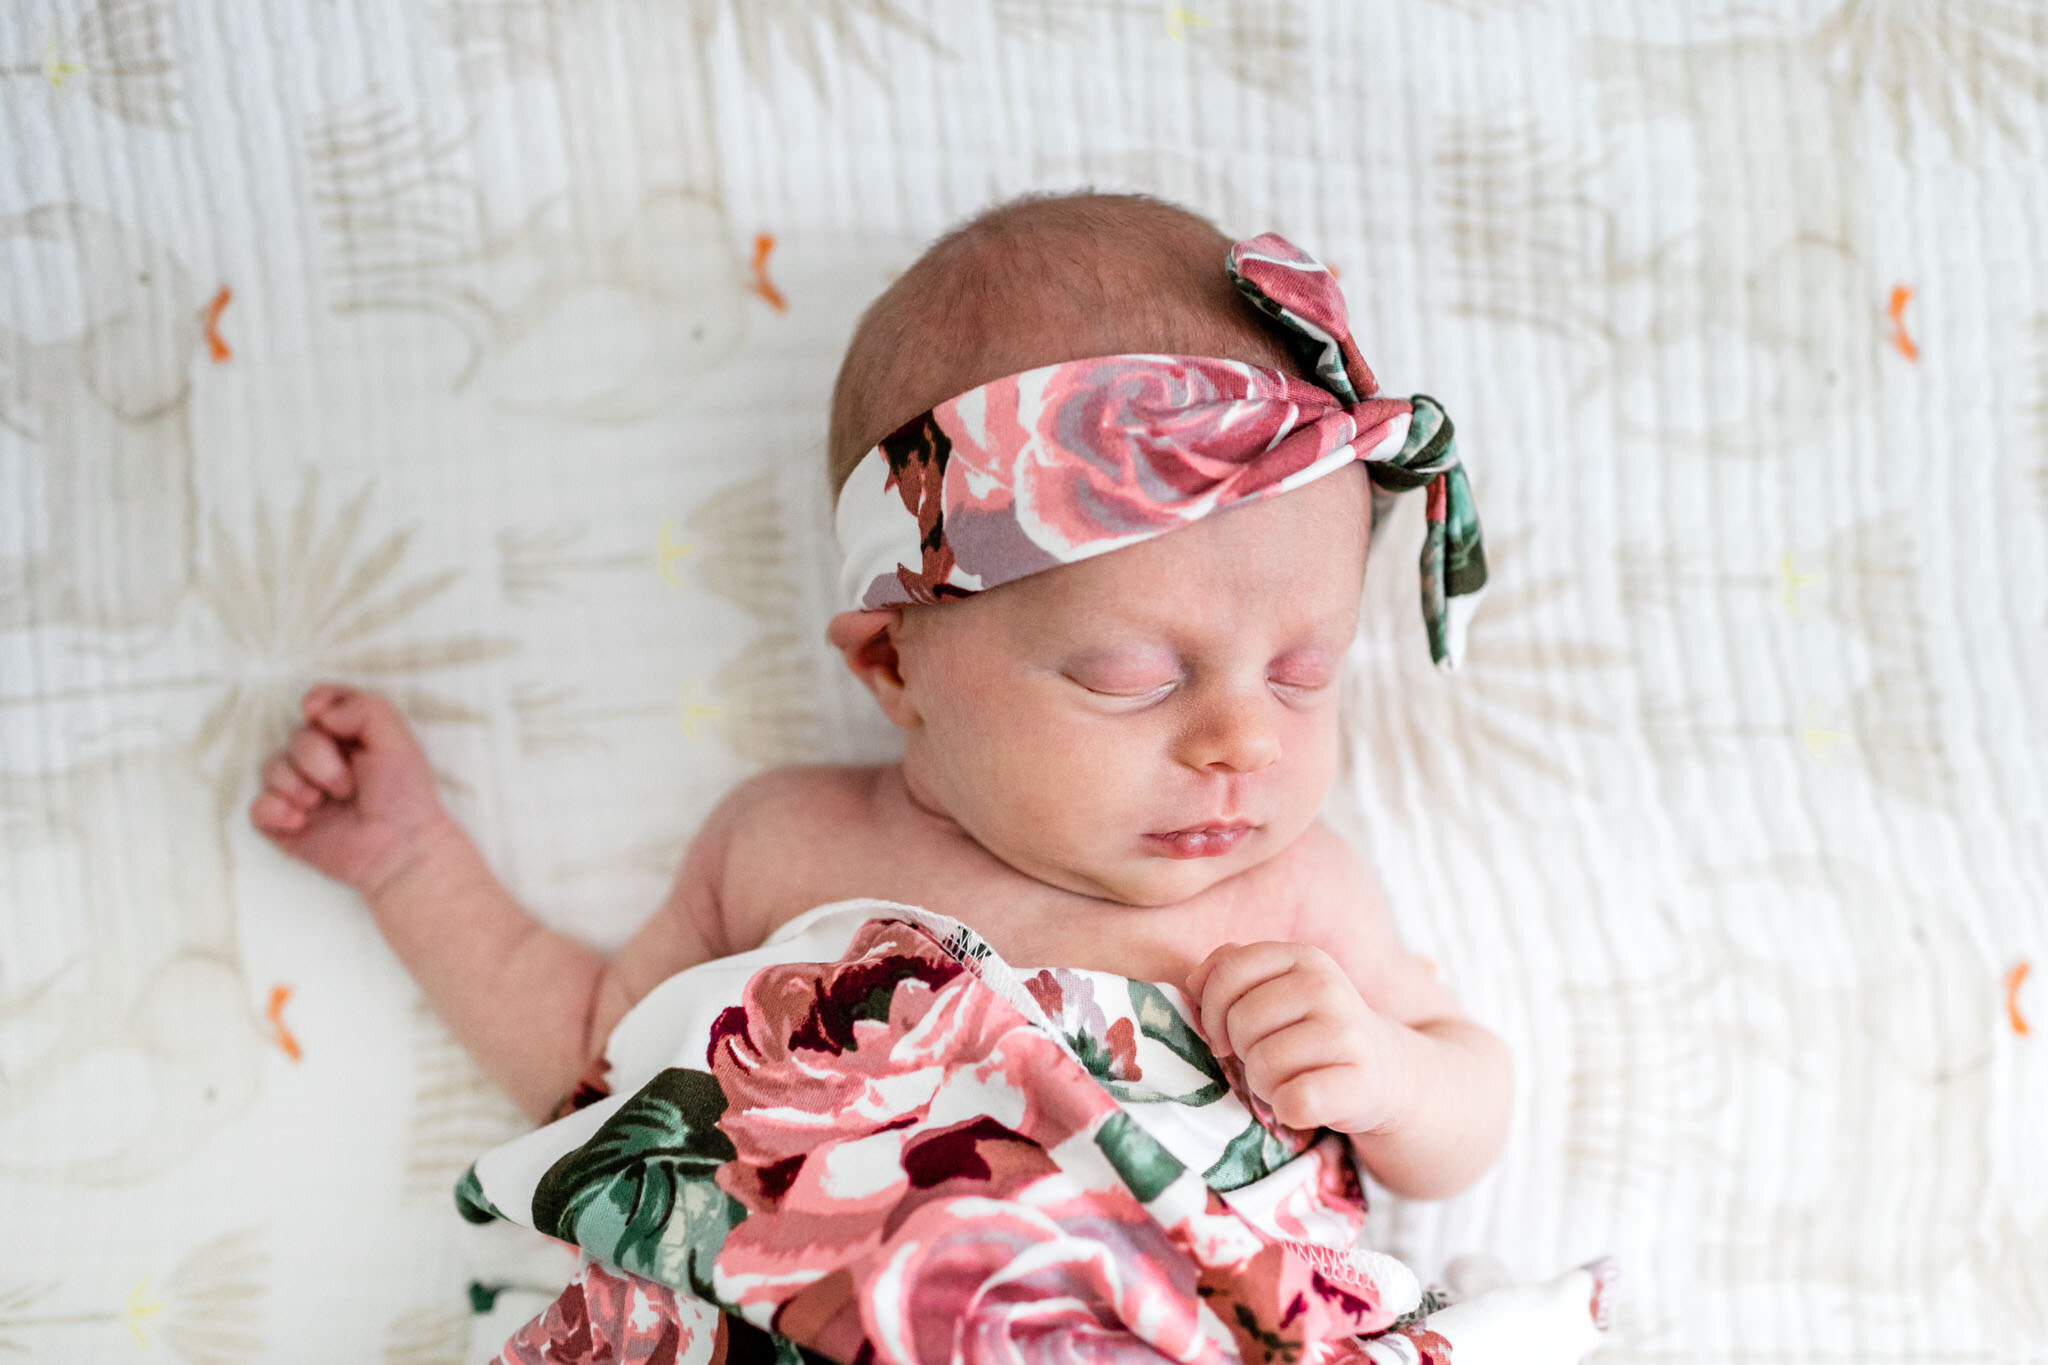 Hillsborough Newborn Photographer | By G. Lin Photography | Baby girl sleeping in crib with white sheets